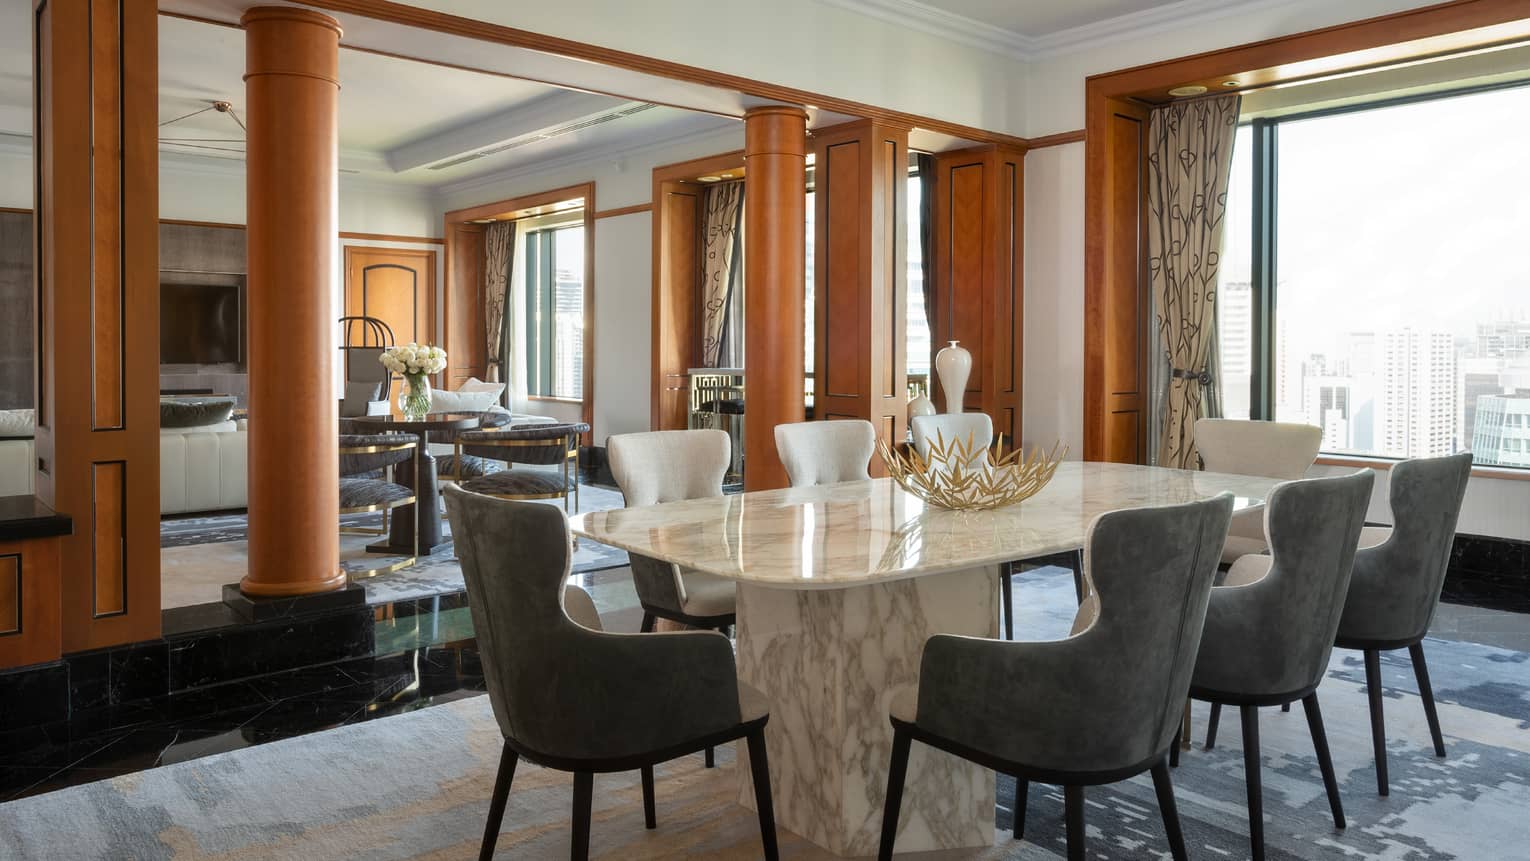 Presidential suite dining area with marble table and floor-to-ceiling windows